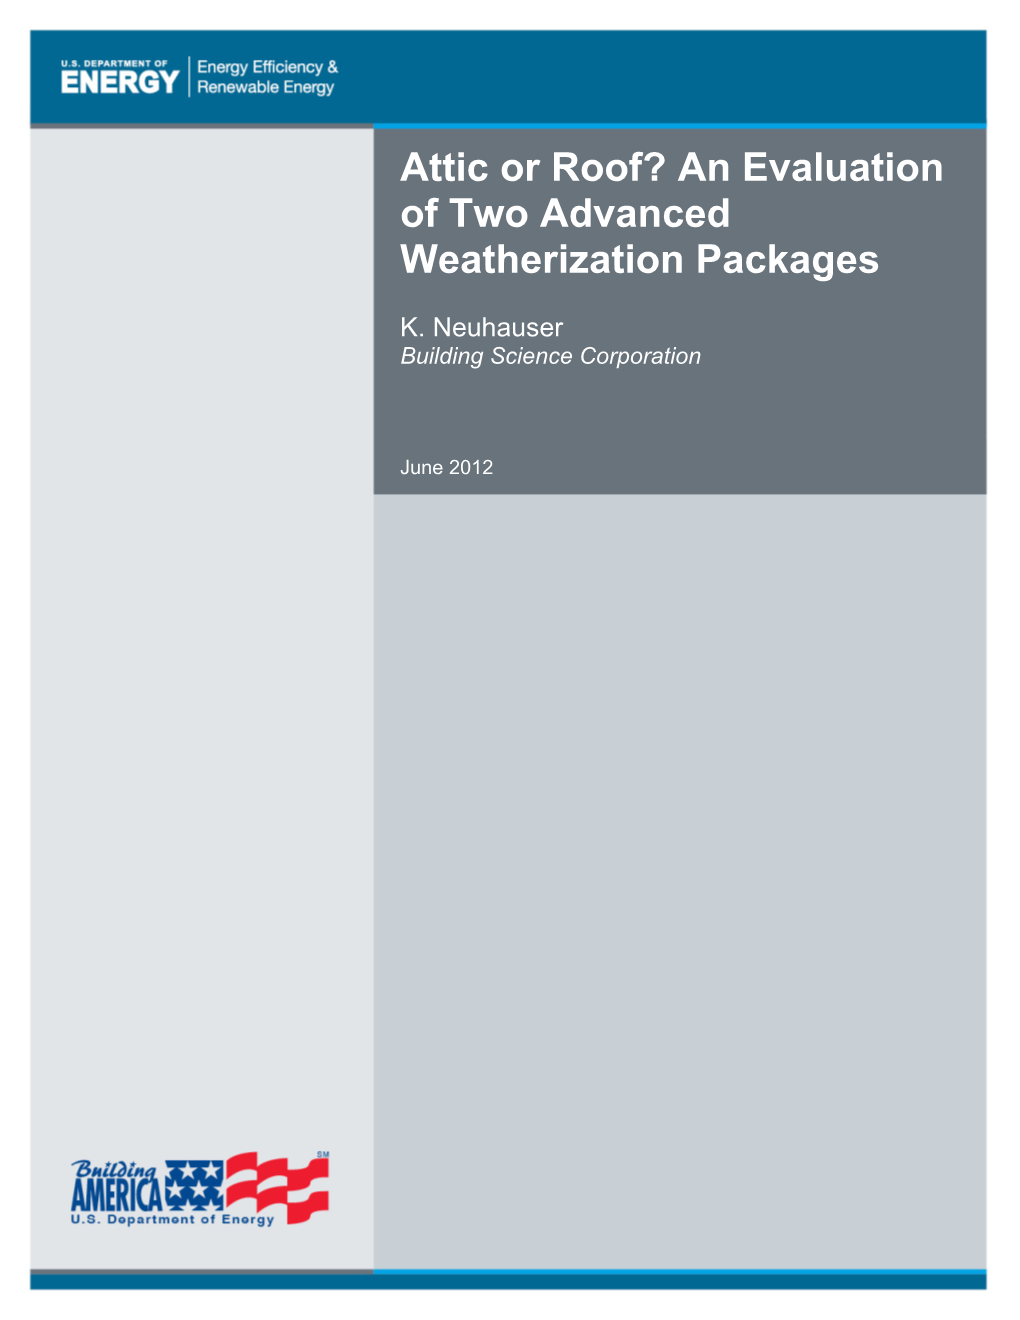 Attic Or Roof? an Evaluation of Two Advanced Weatherization Packages